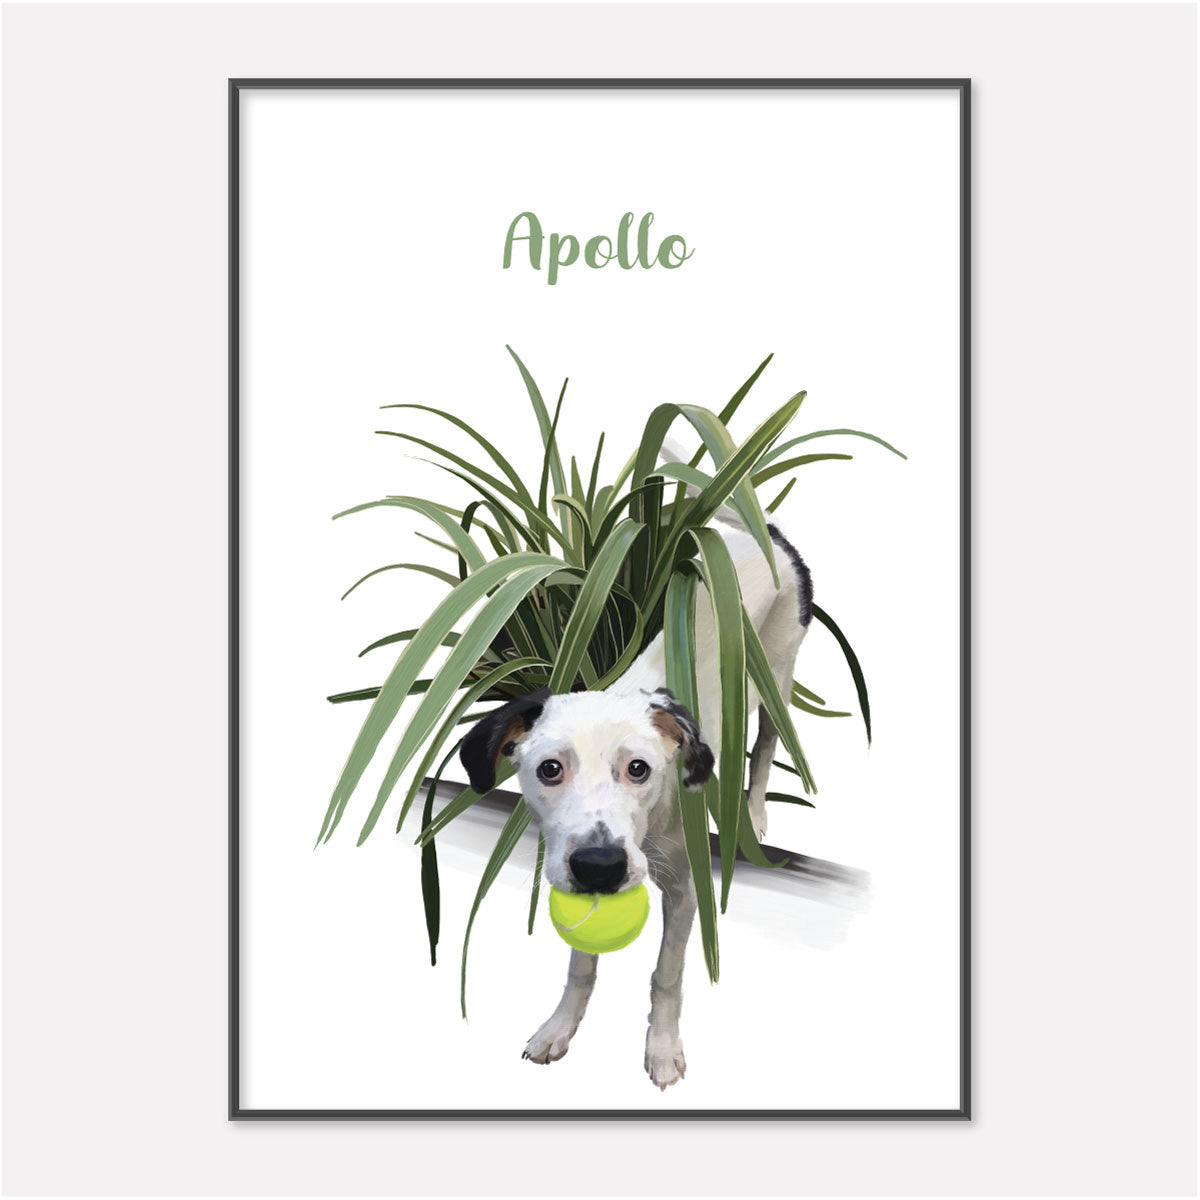 Custom Hand Painted Pet Portrait of Dog with Flax Plant